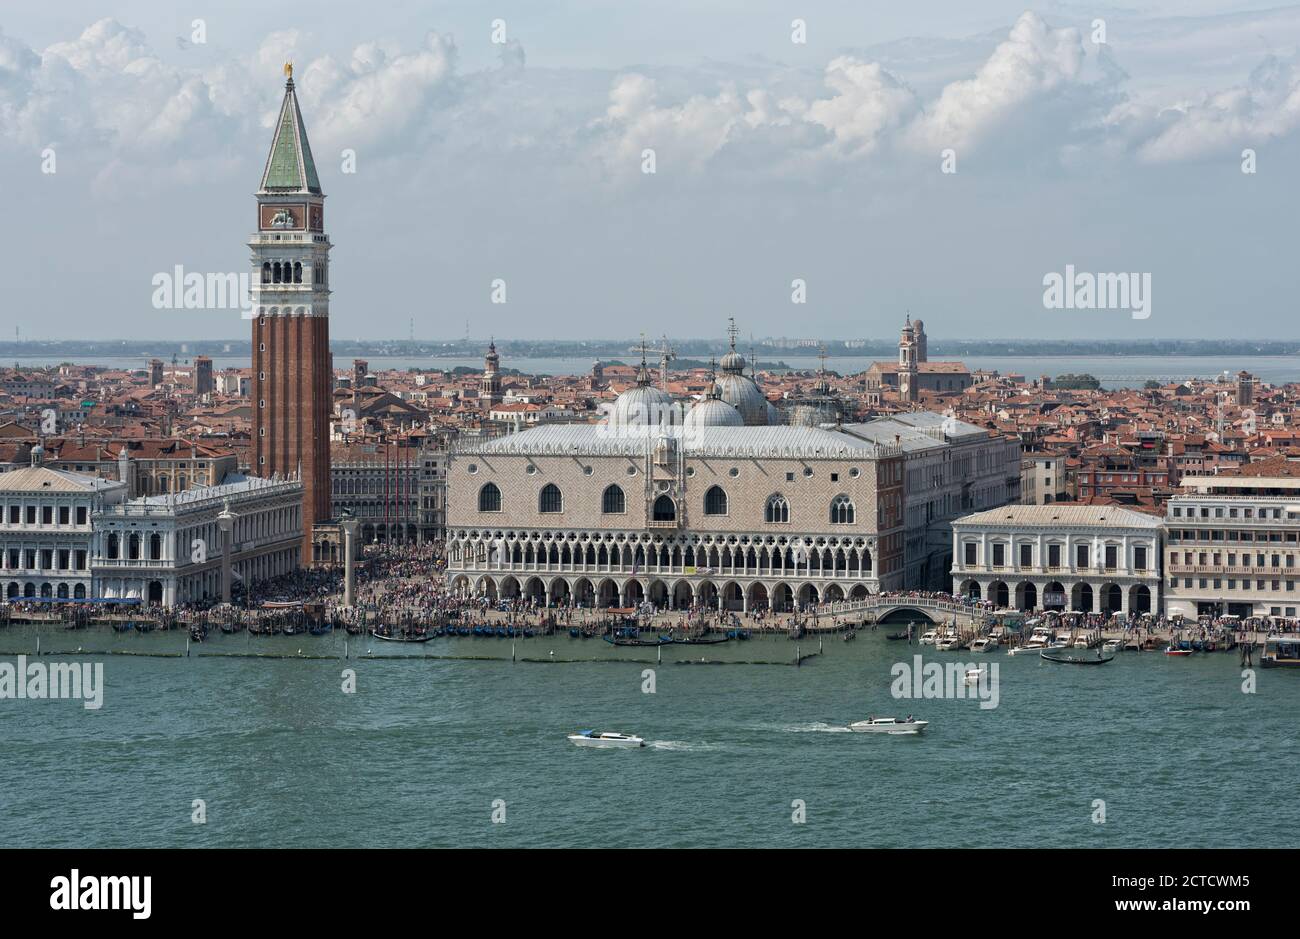 Doge's palace, San Marco's Campanile set in the larger context of the island. Shot taken at San Giorgio Maggiore bell tower from across Venice's lagoon, Italy. Stock Photo